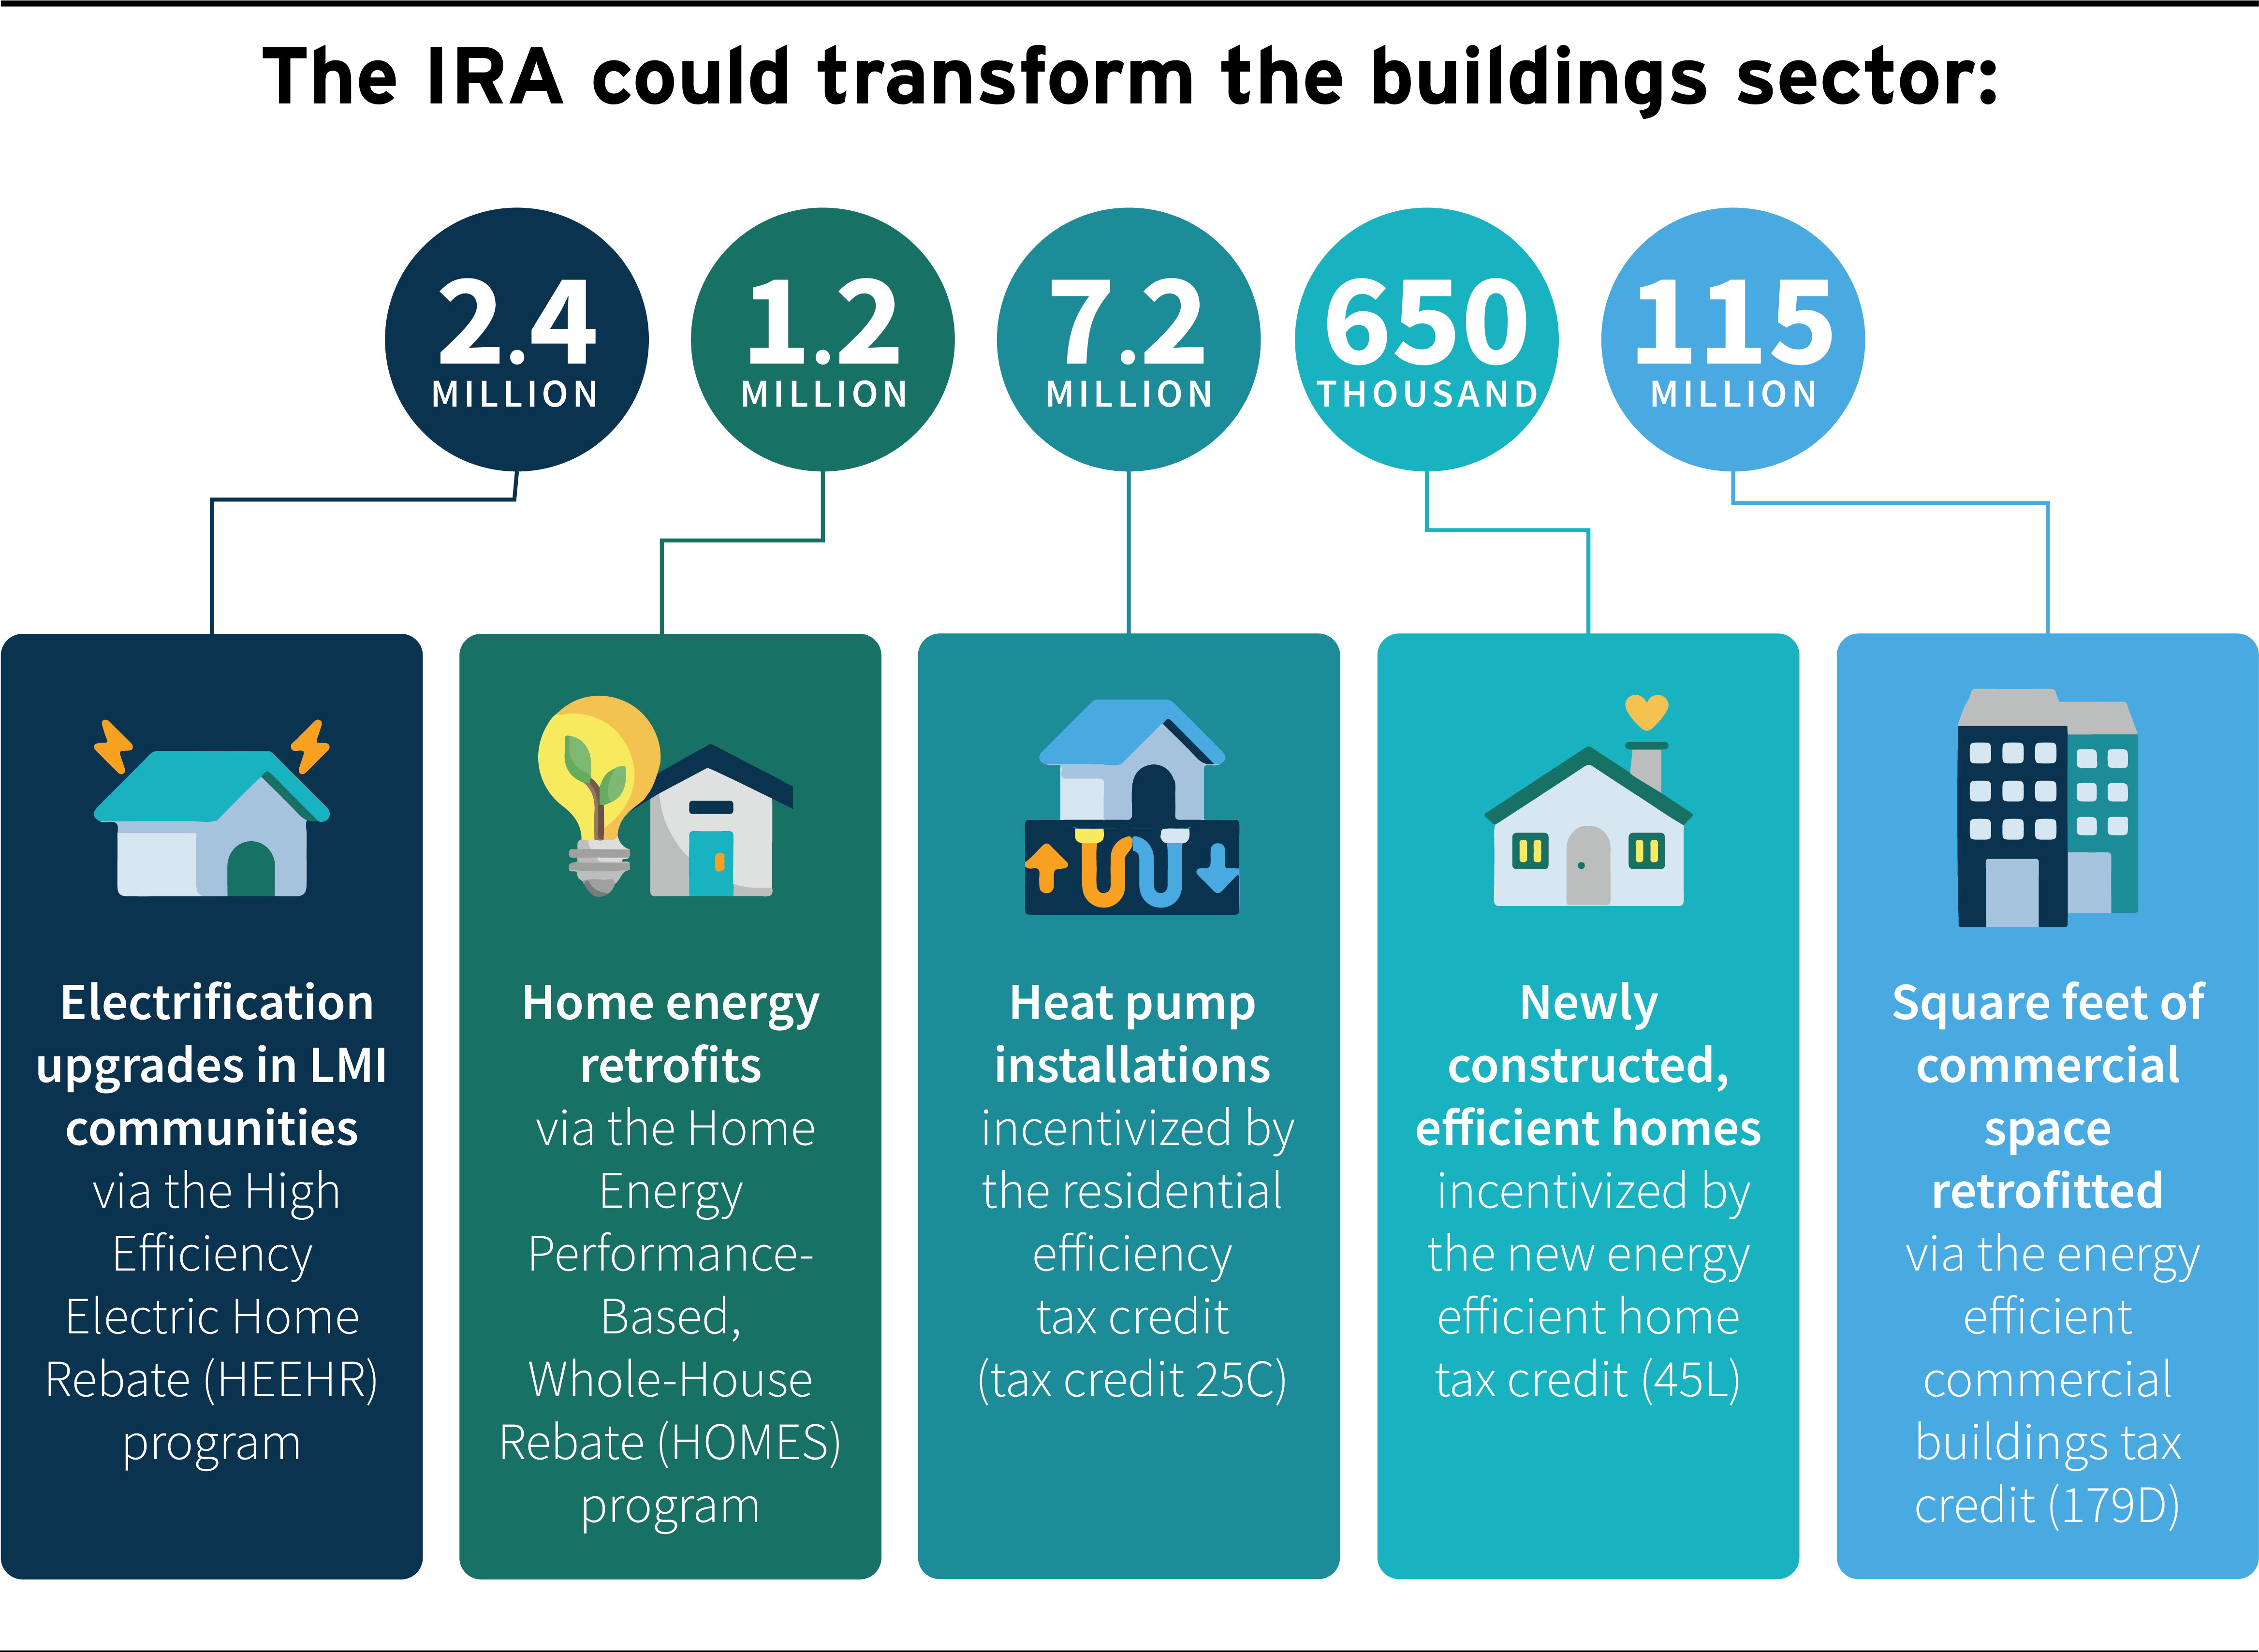 The IRA could transform the buildings sector